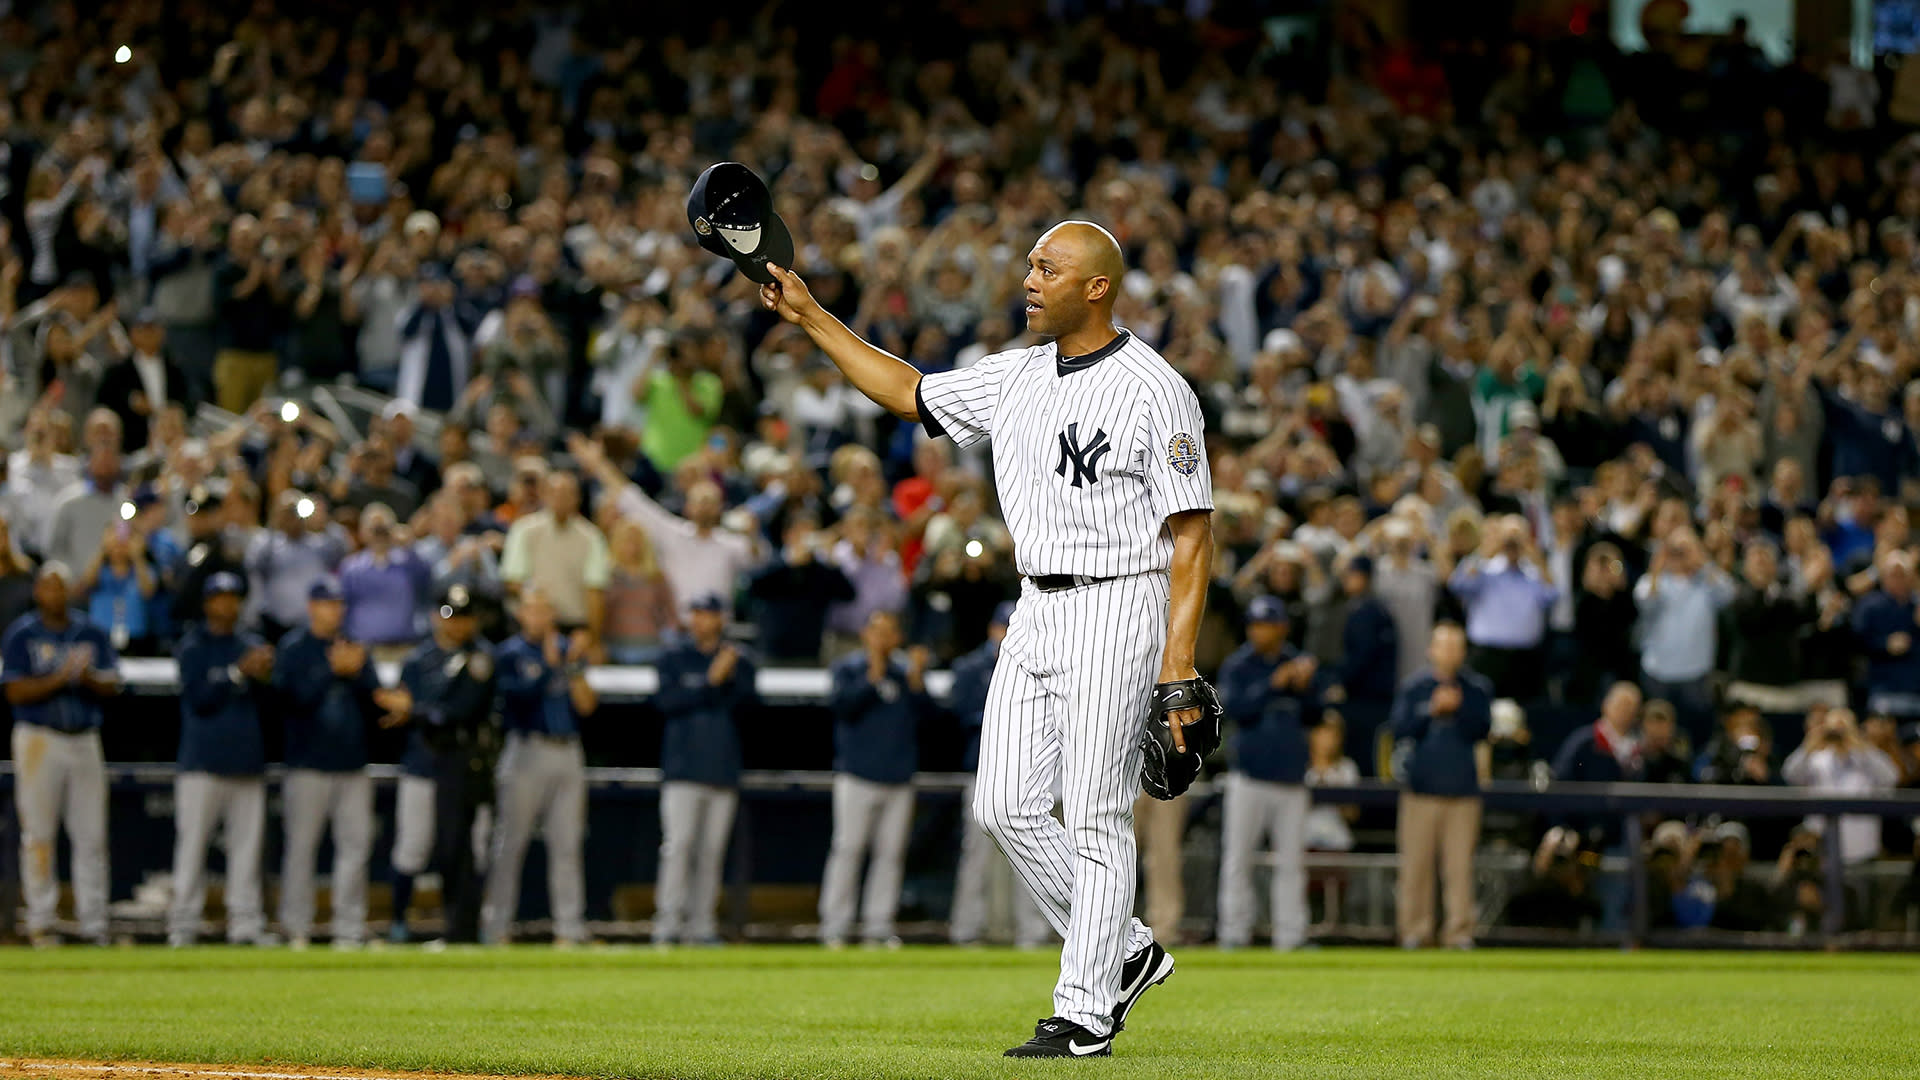 Mariano Rivera opens up on being baseball's first unanimous Hall